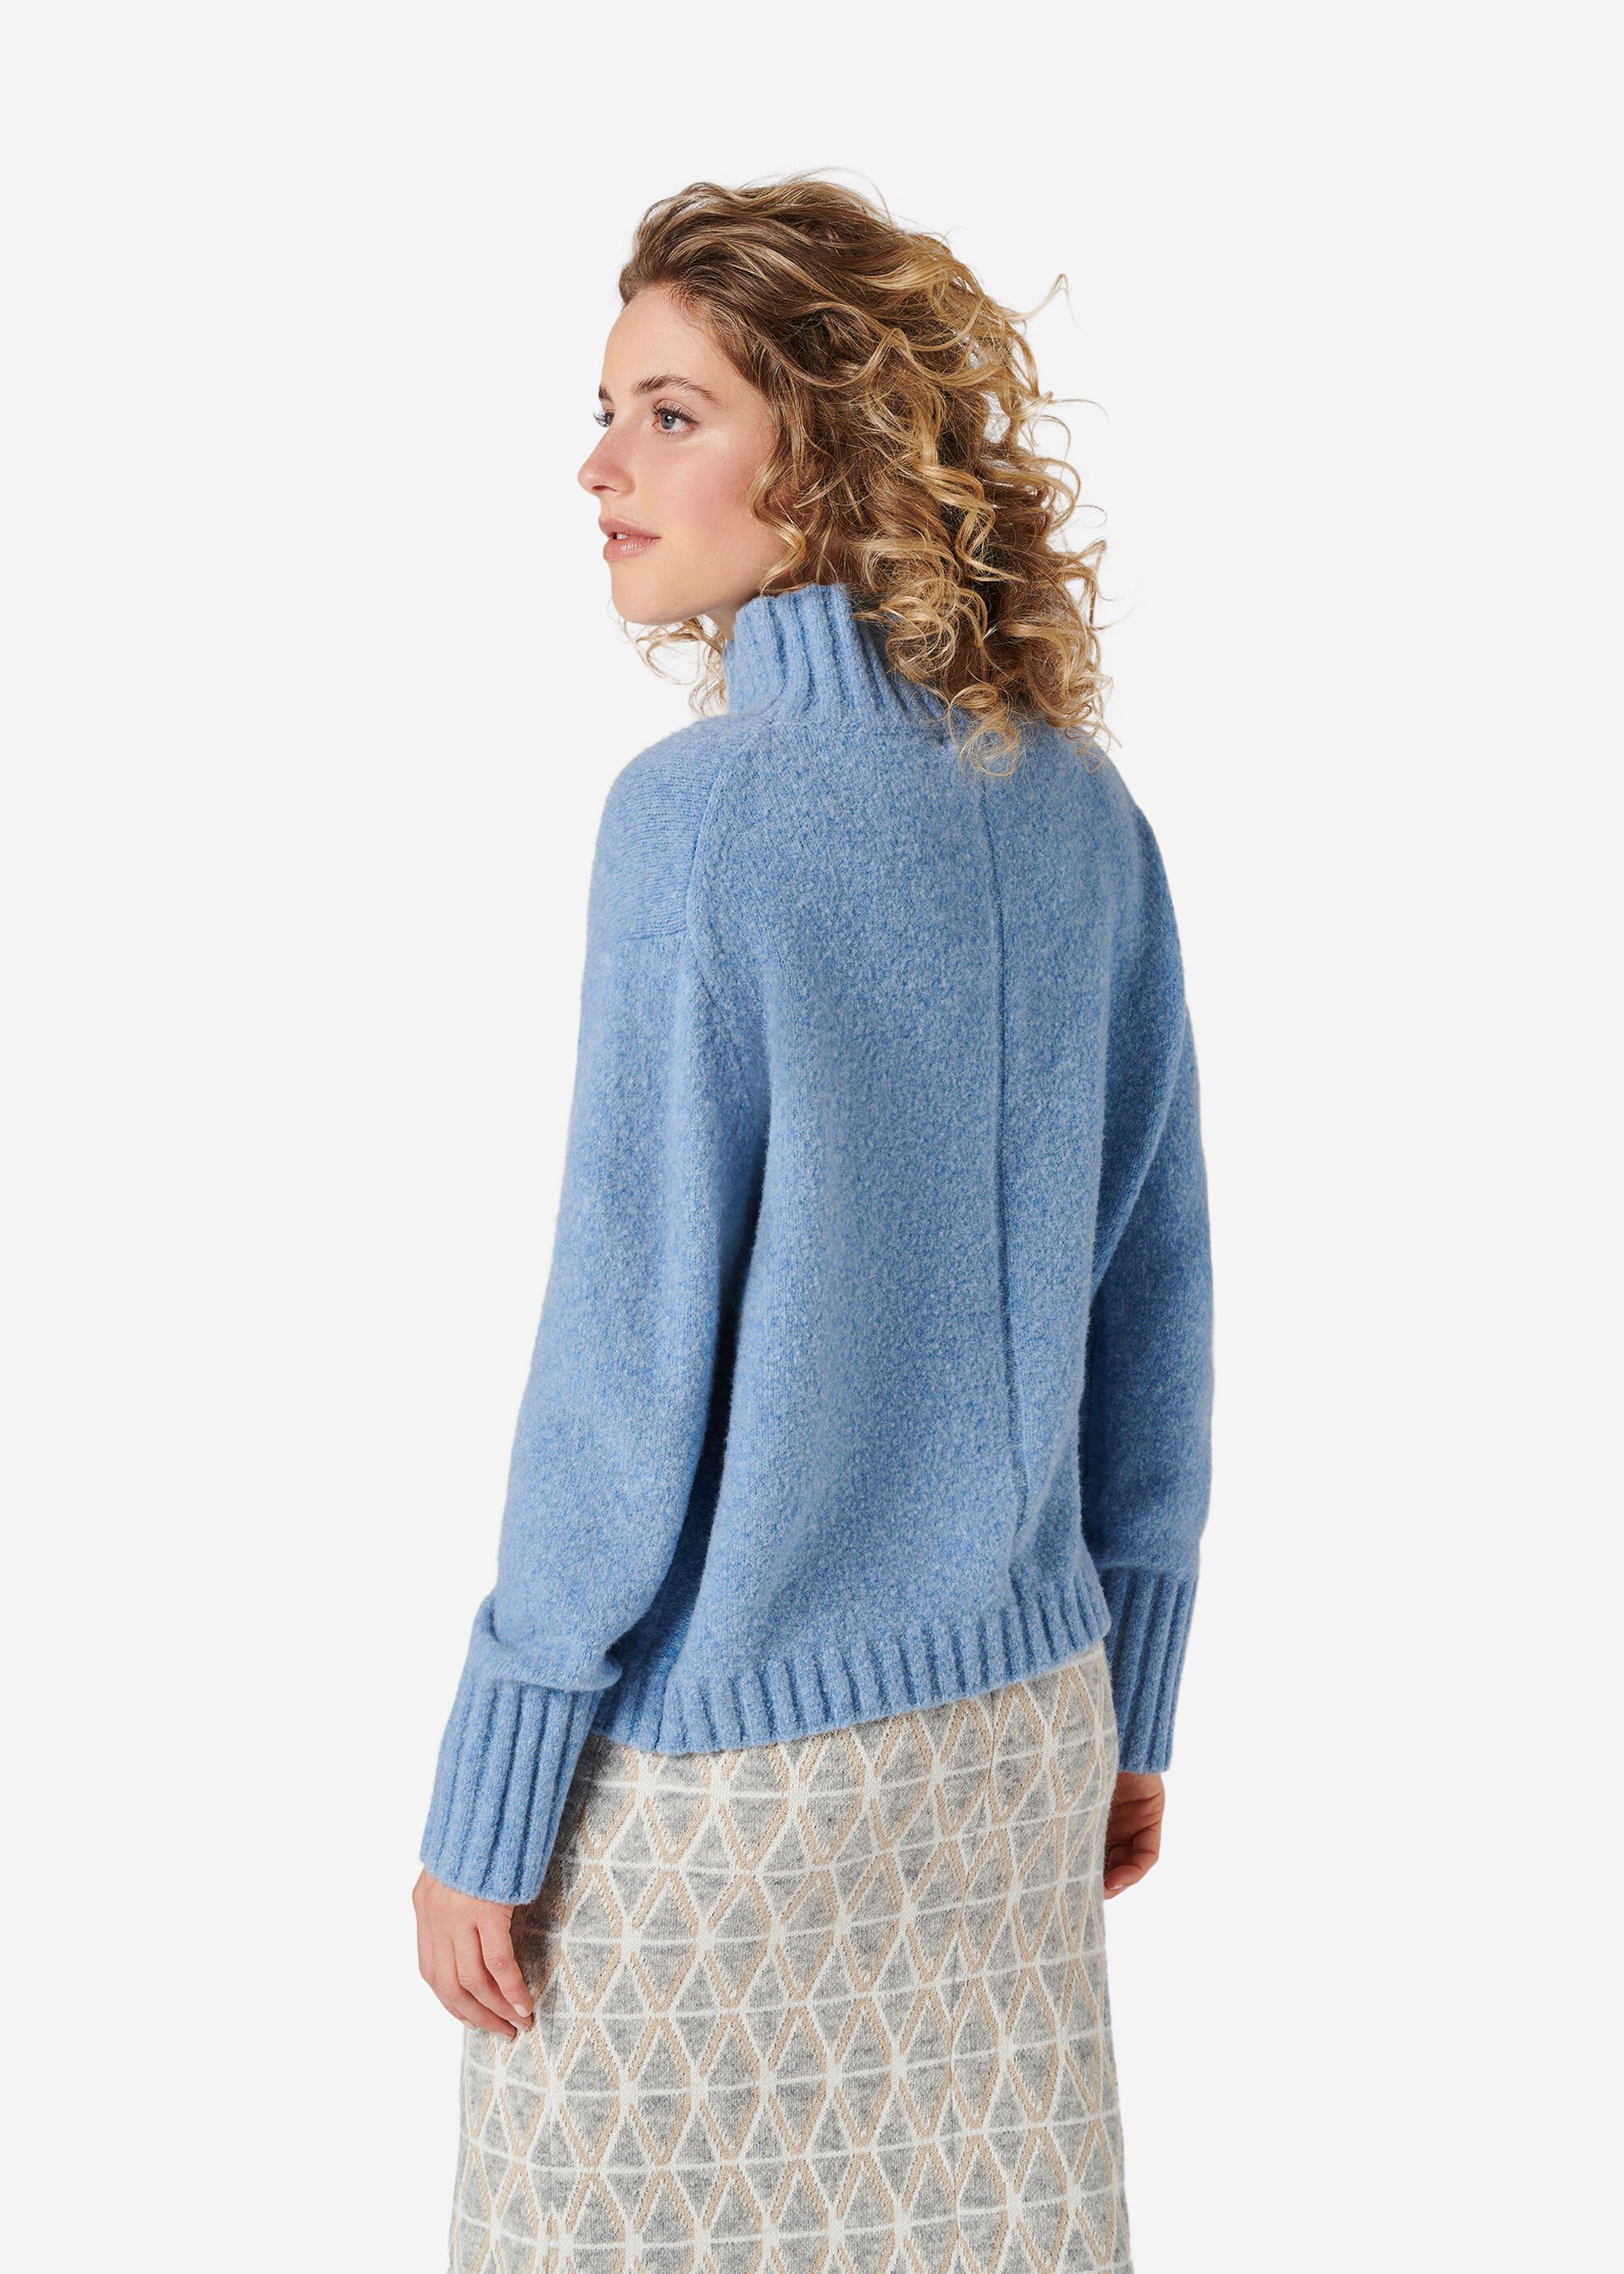 aus Wolle-Yak-Mix in paradise eve mit Strickpullover Polly